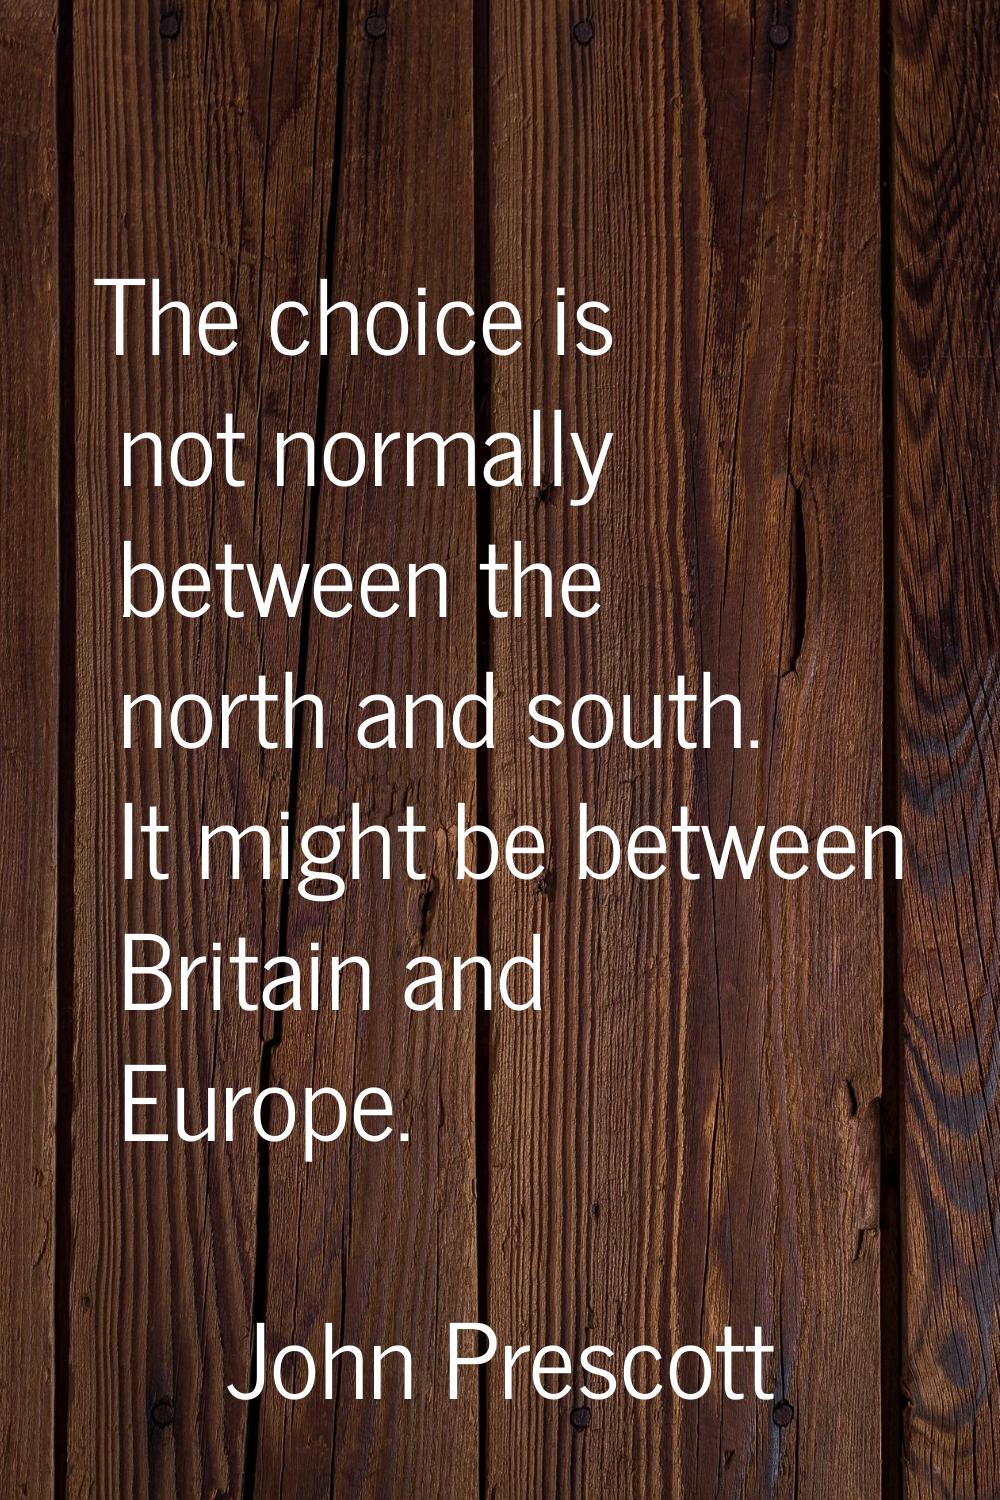 The choice is not normally between the north and south. It might be between Britain and Europe.